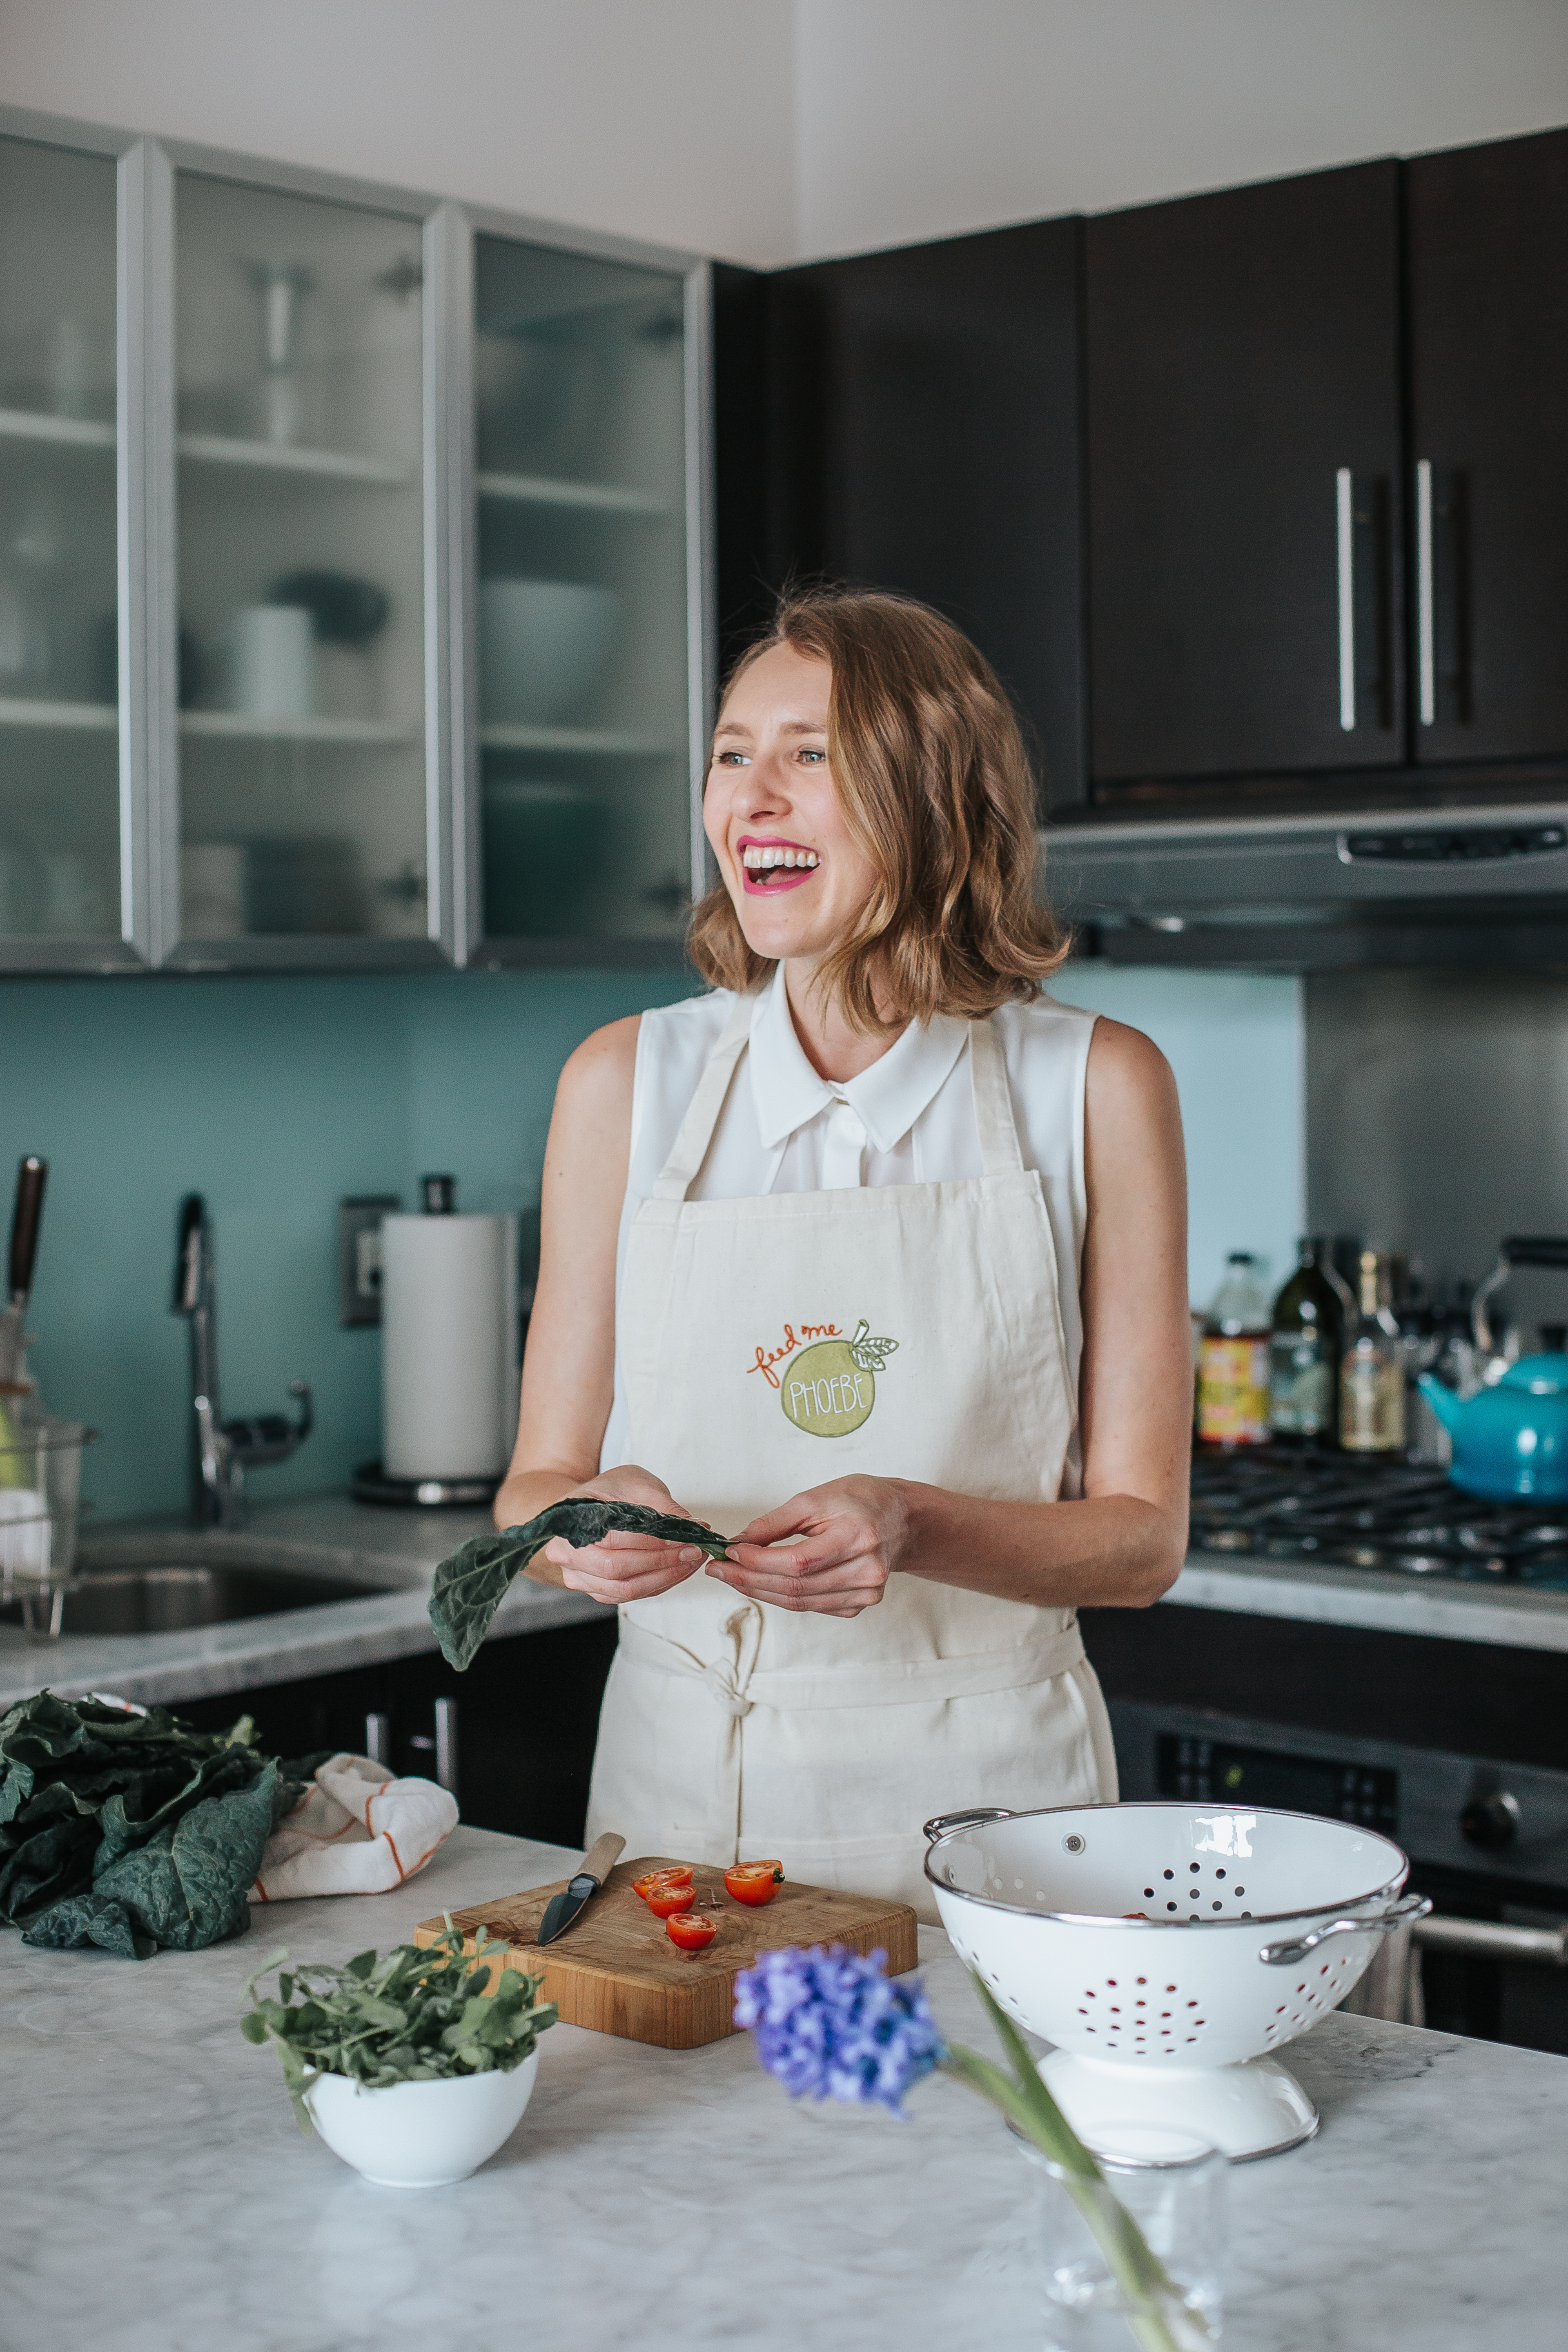 What’s In Her Fridge? Author & Chef Phoebe Lapine Dishes On Eating For Her Health